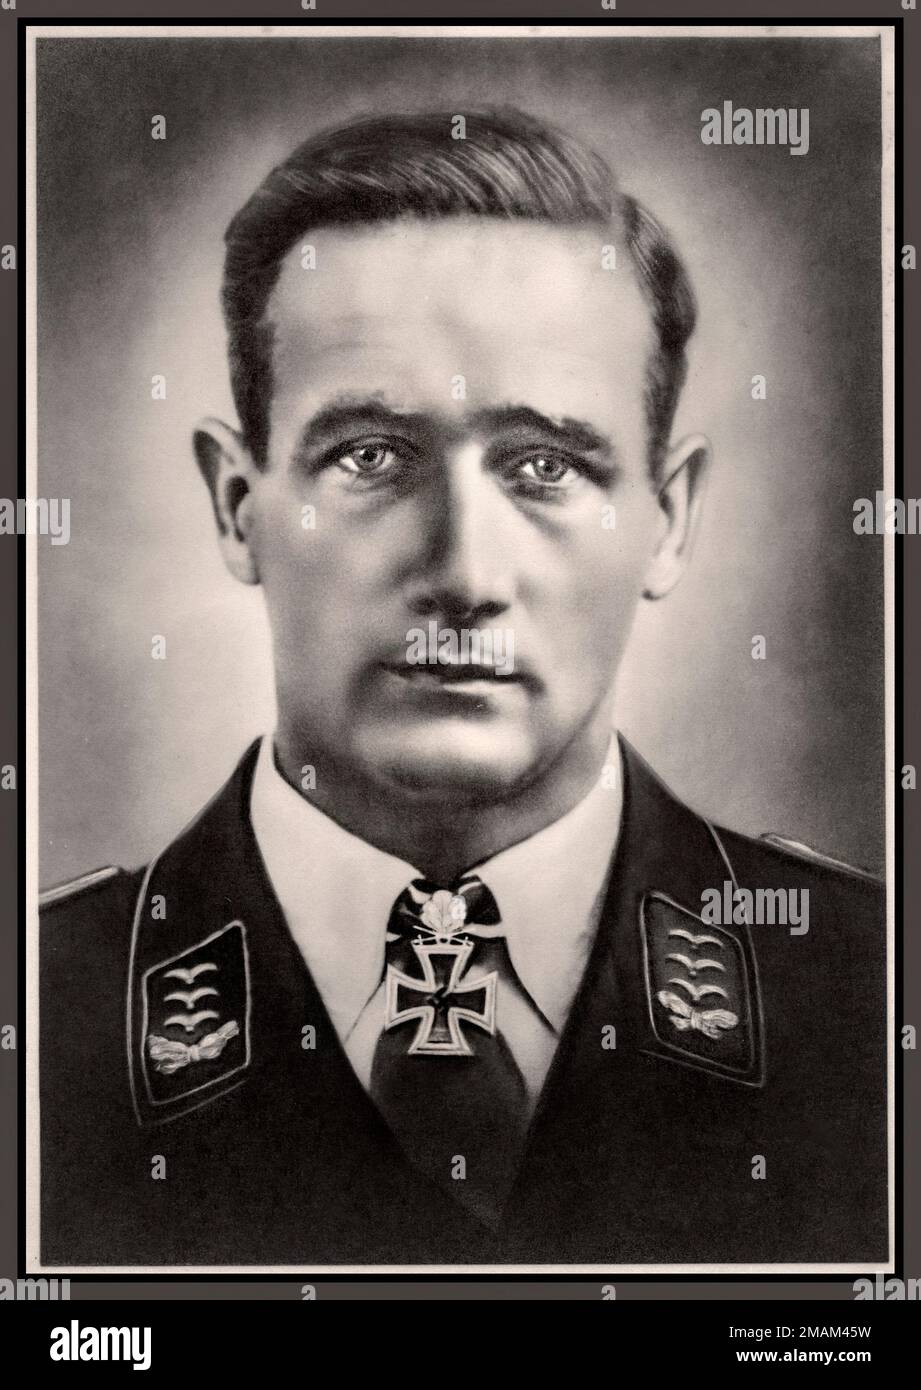 Gordon Gollob (16 June 1912 – 7 September 1987) was a Nazi Austrian fighter pilot during World War II. A fighter ace, he was credited with 150 enemy aircraft shot down in over 340 combat missions. Gollob claimed the majority of his victories over the Eastern Front, and six over the Western Front. Gollob volunteered for military service in the Austrian Armed Forces in 1933. In March 1938, following the Anschluss, the annexation of Austria into Nazi Germany, Gollob was transferred to the Luftwaffe. Stock Photo